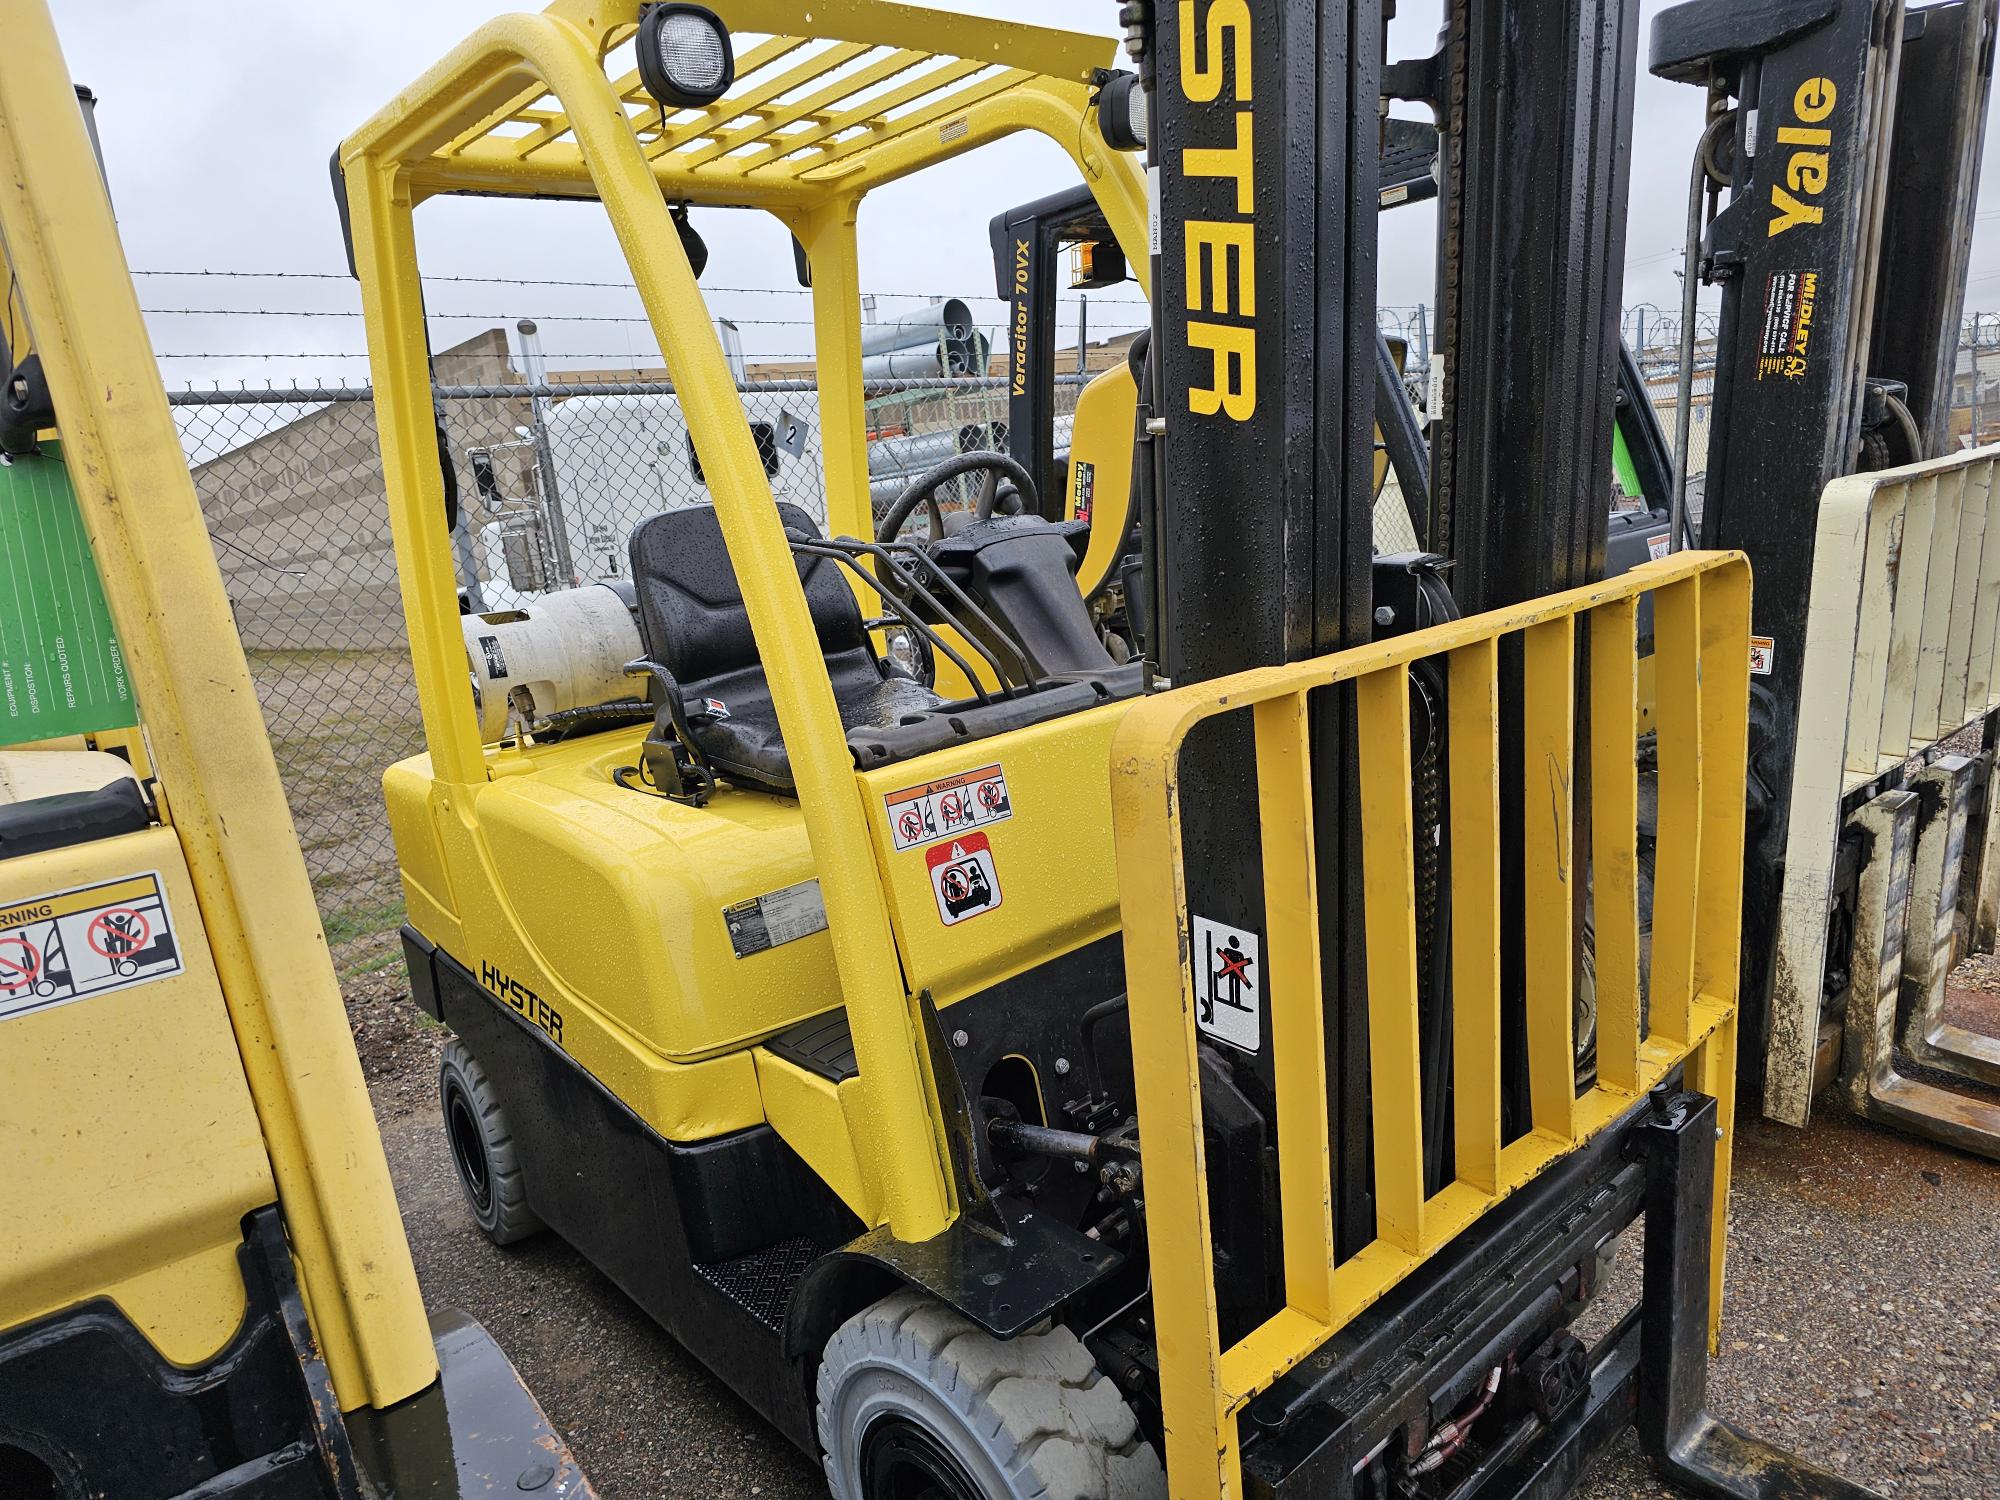 Used Forklifts in Albuquerque